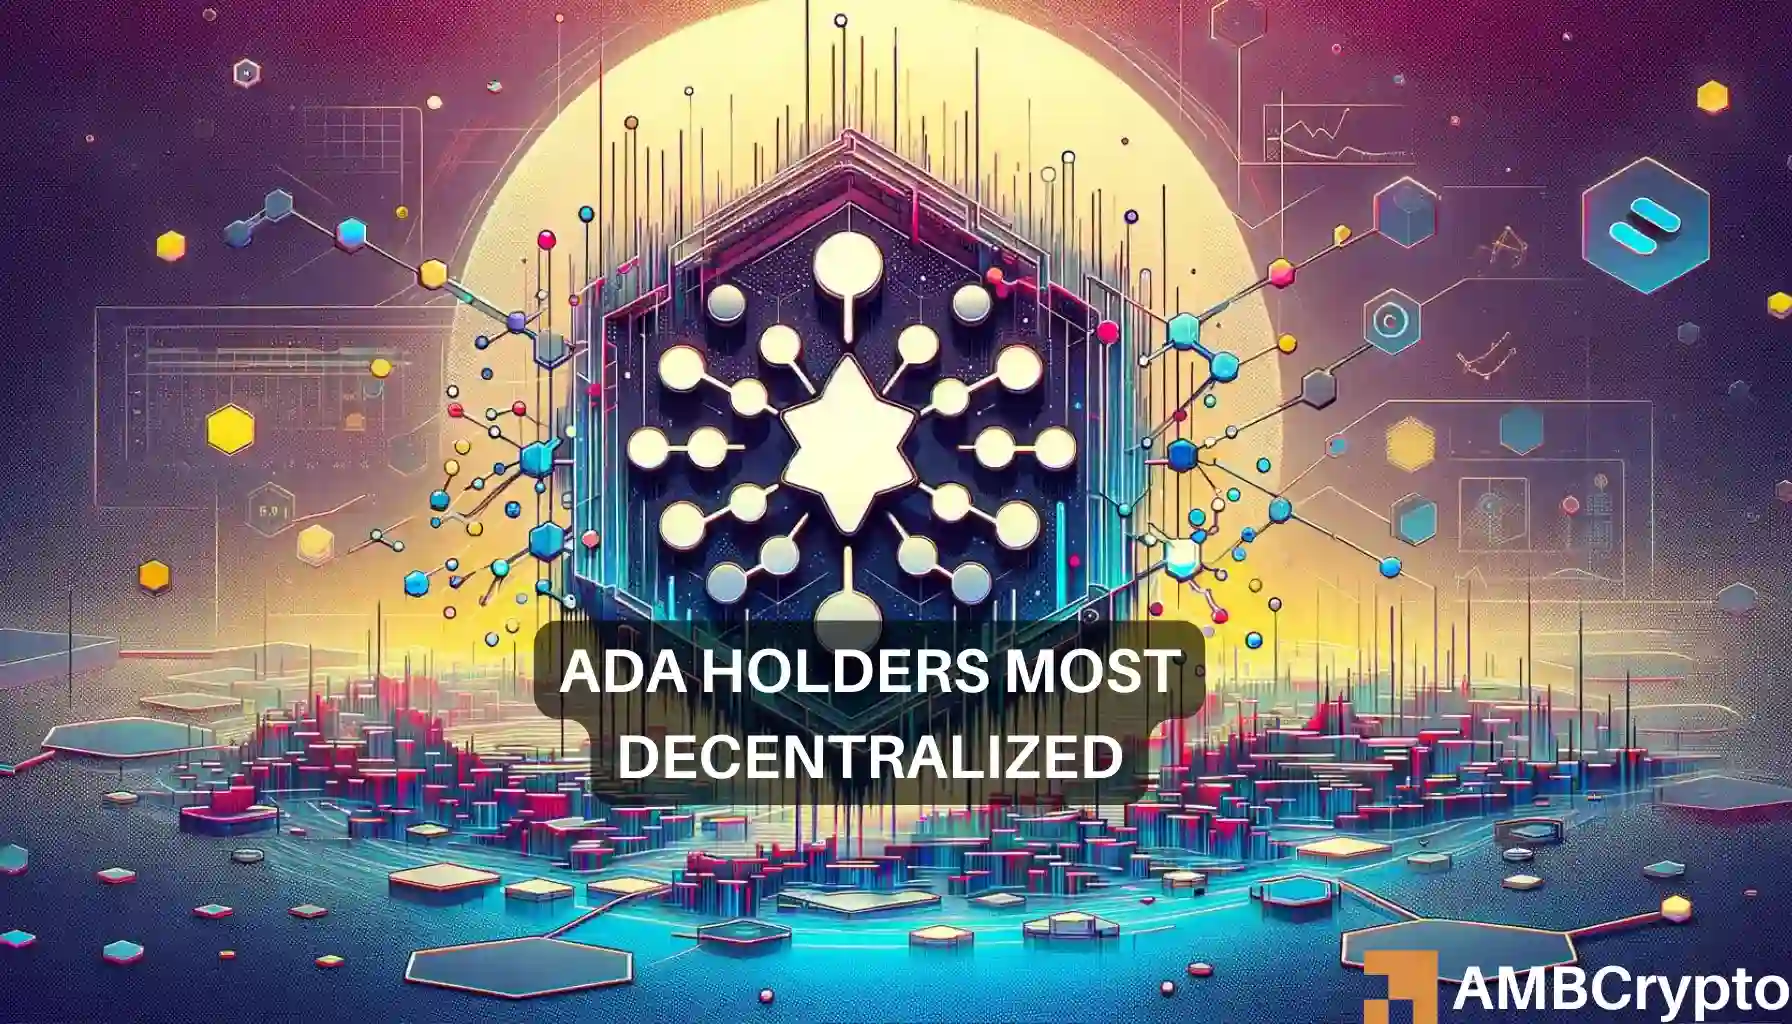 Cardano TOPS this altcoin chart – Good news for ADA holders?